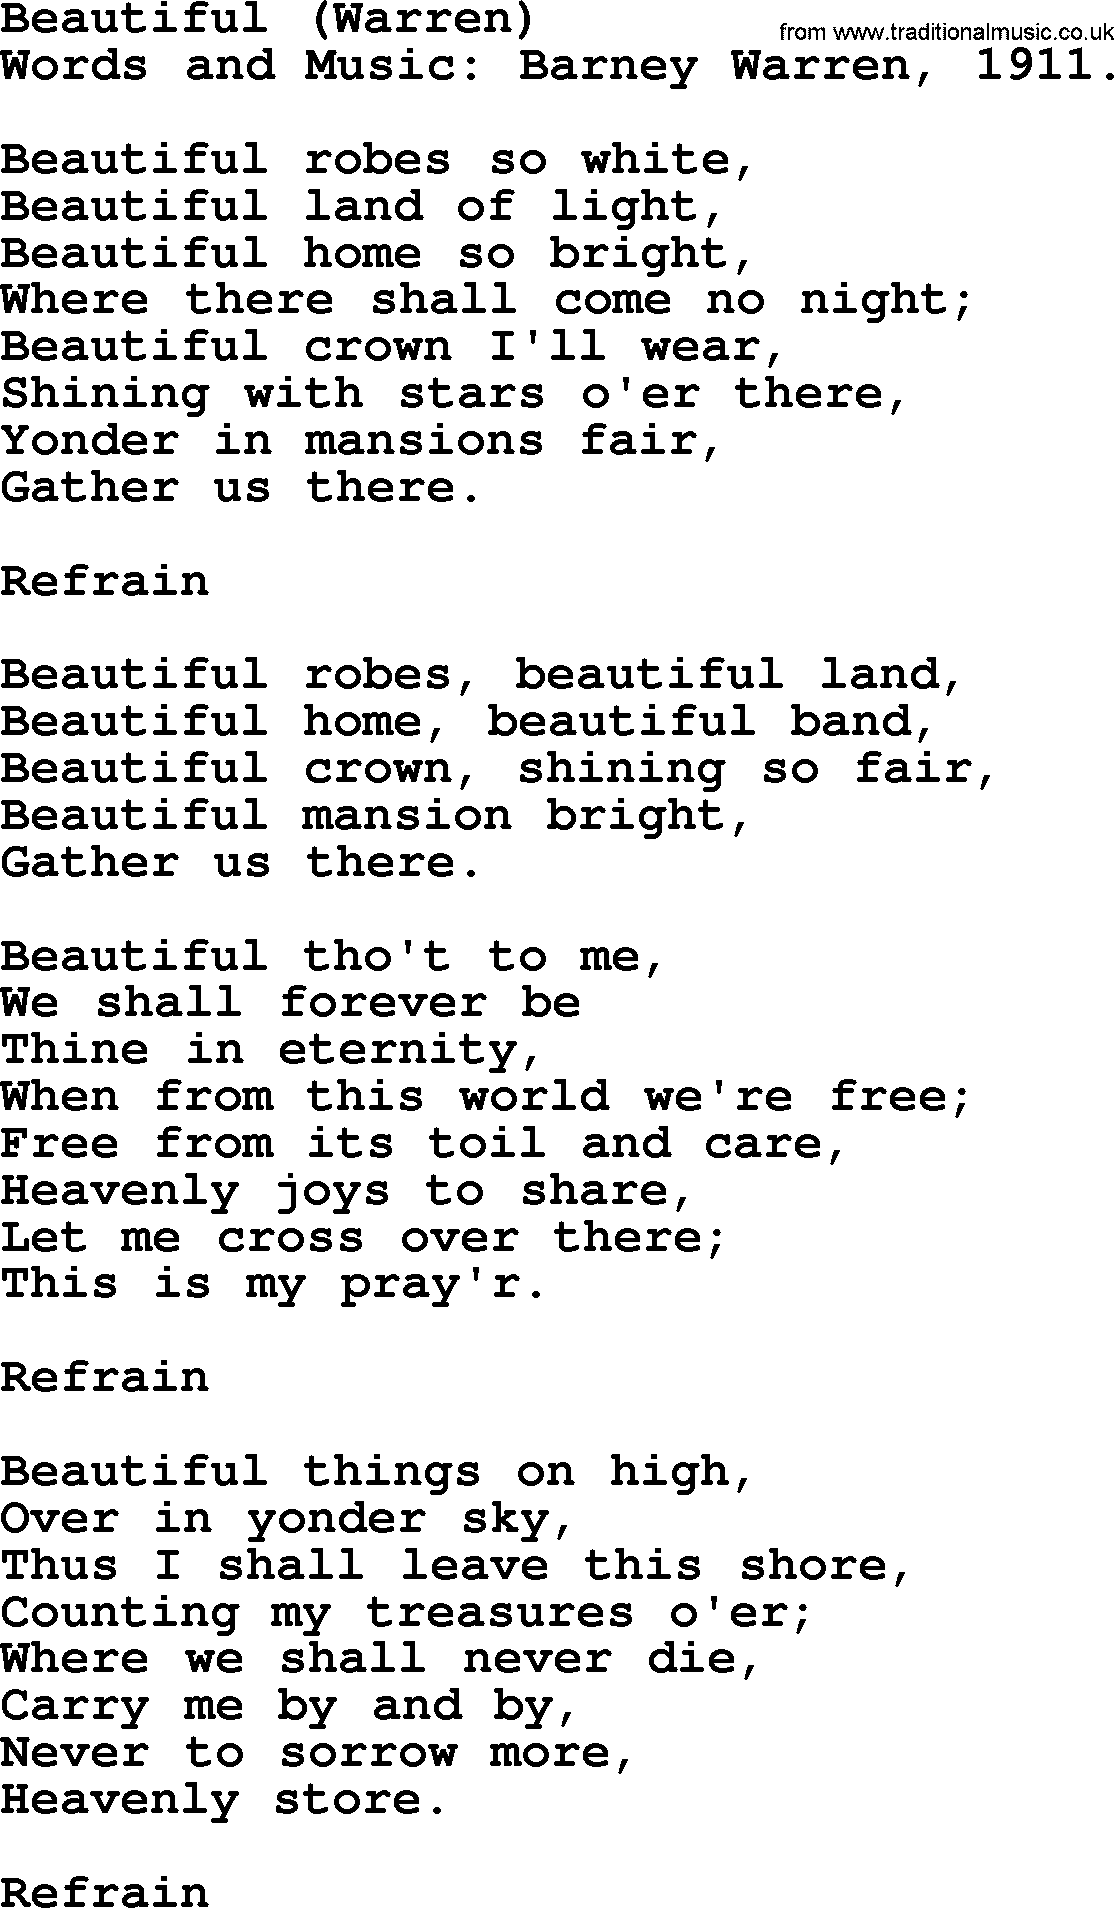 Songs and Hymns about Heaven: Beautiful (warren) lyrics with PDF